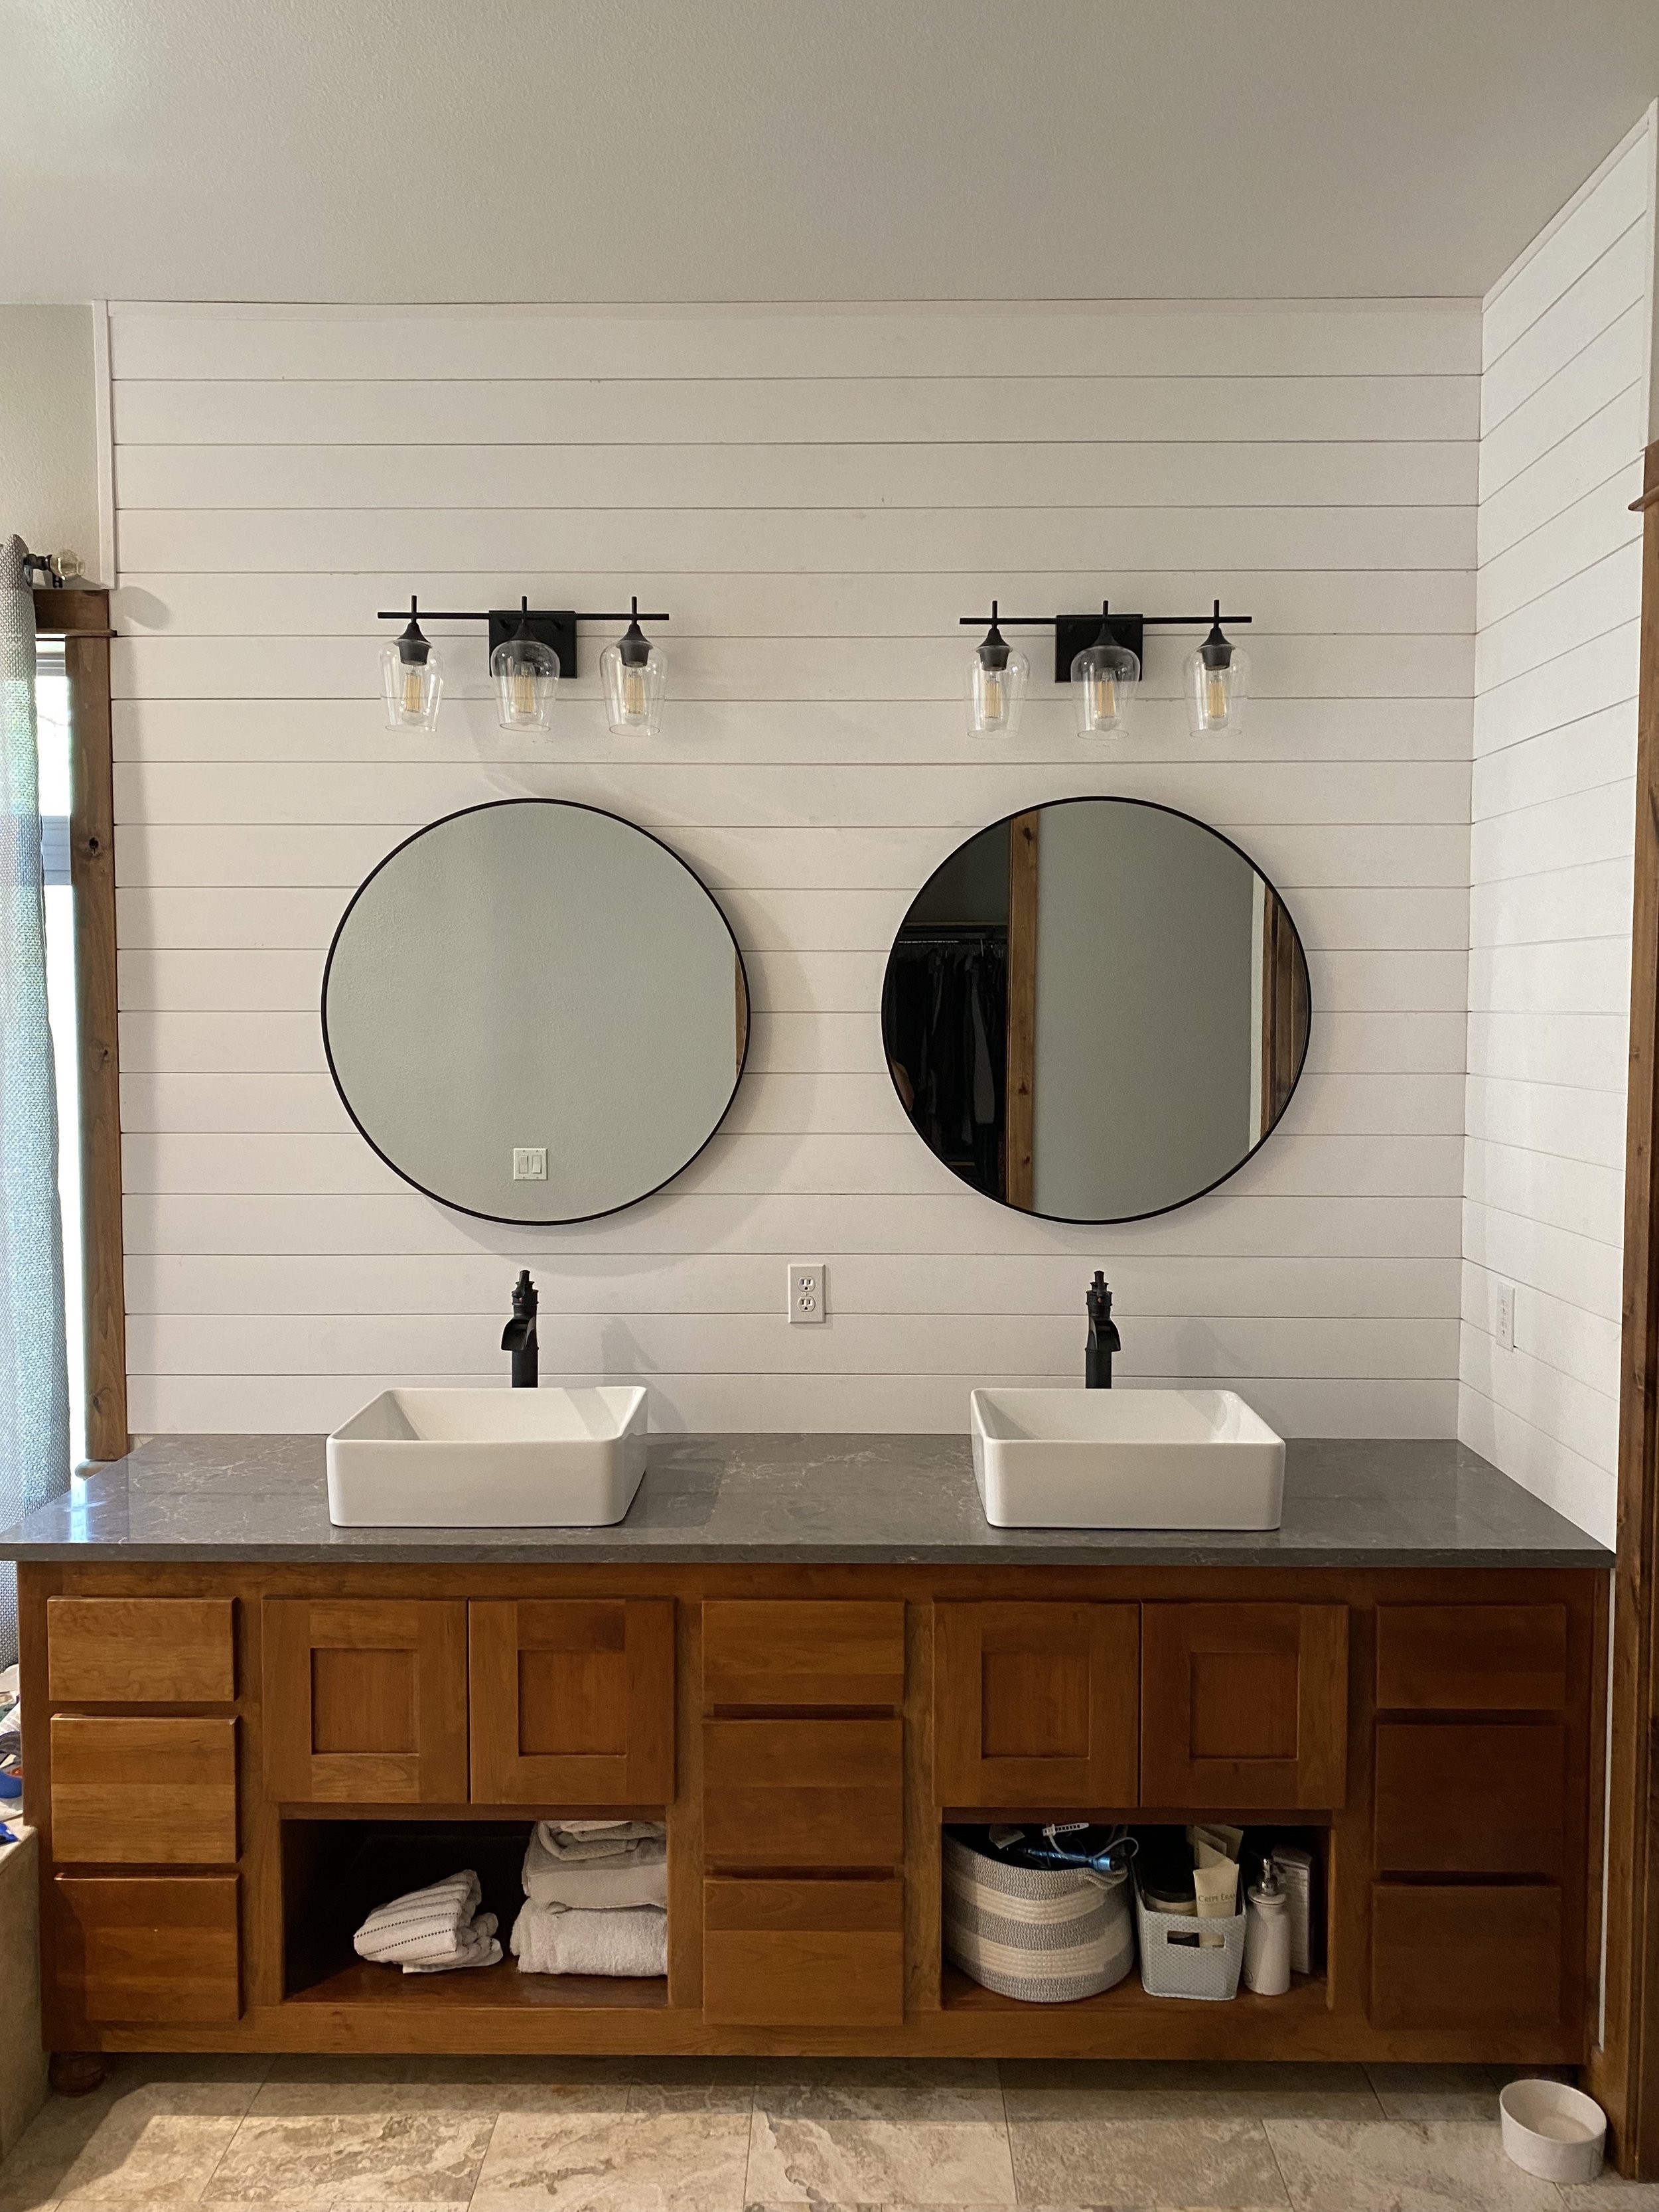 10 Ideas For Double Vanity Bathroom Mirrors That Are A-OK, 49% OFF